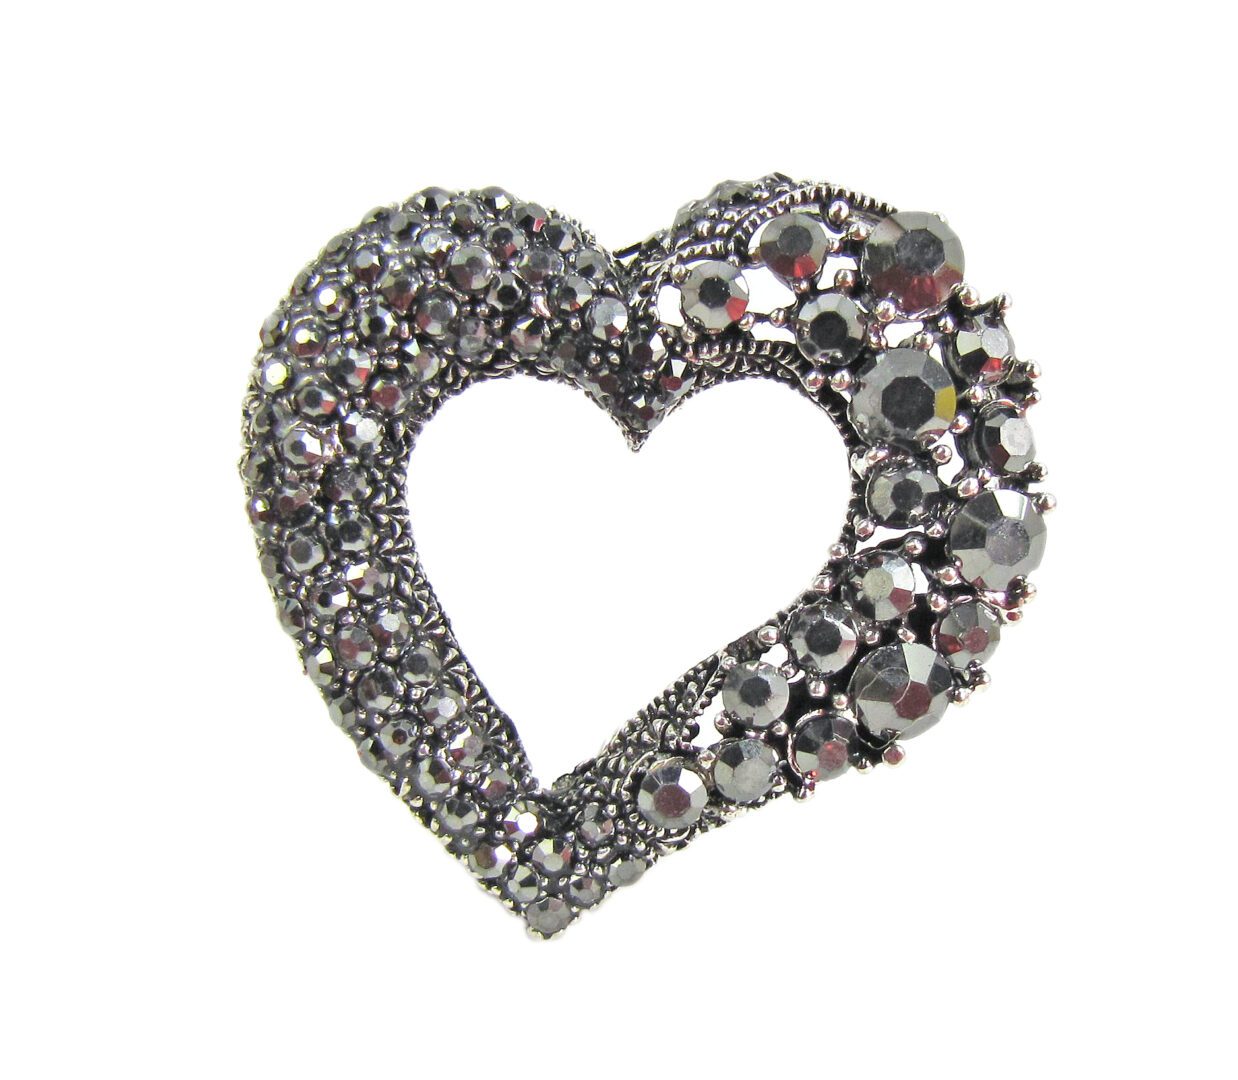 heart-shaped jewelry with black crystals